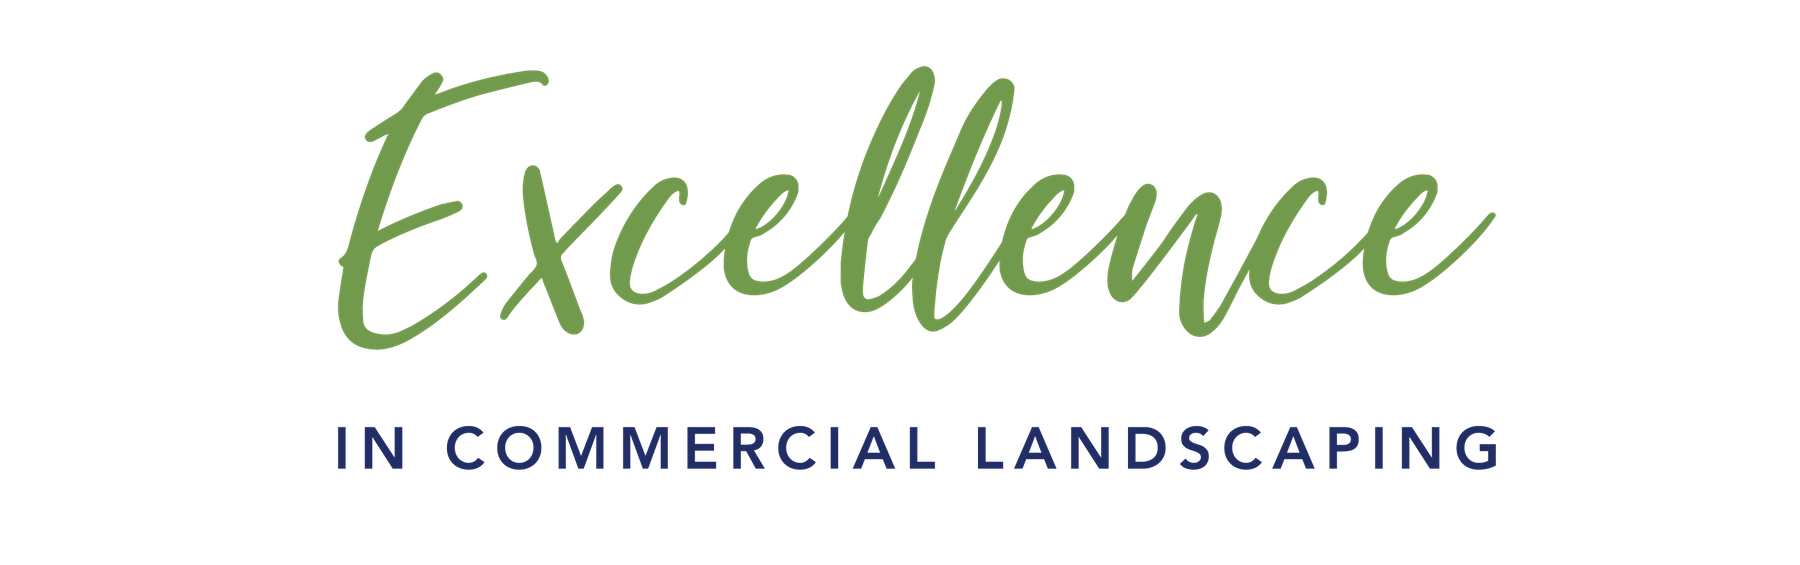 excellence in commercial landscaping